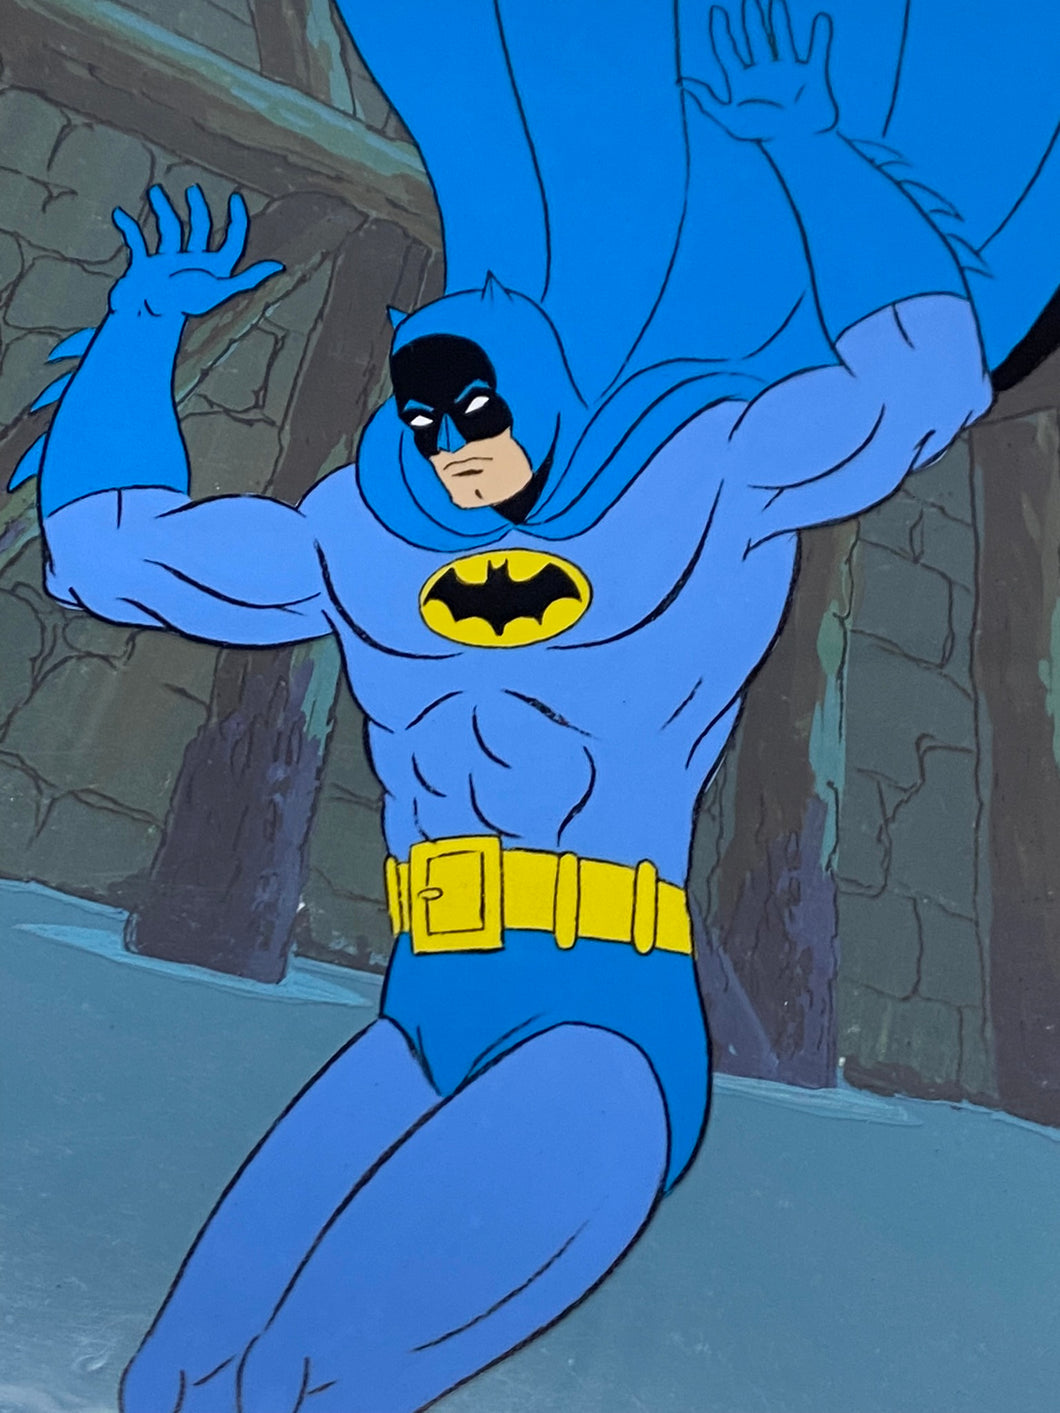 The Adventures of Batman - Original animation cel of Batman, with master painted background (57x27 cm)